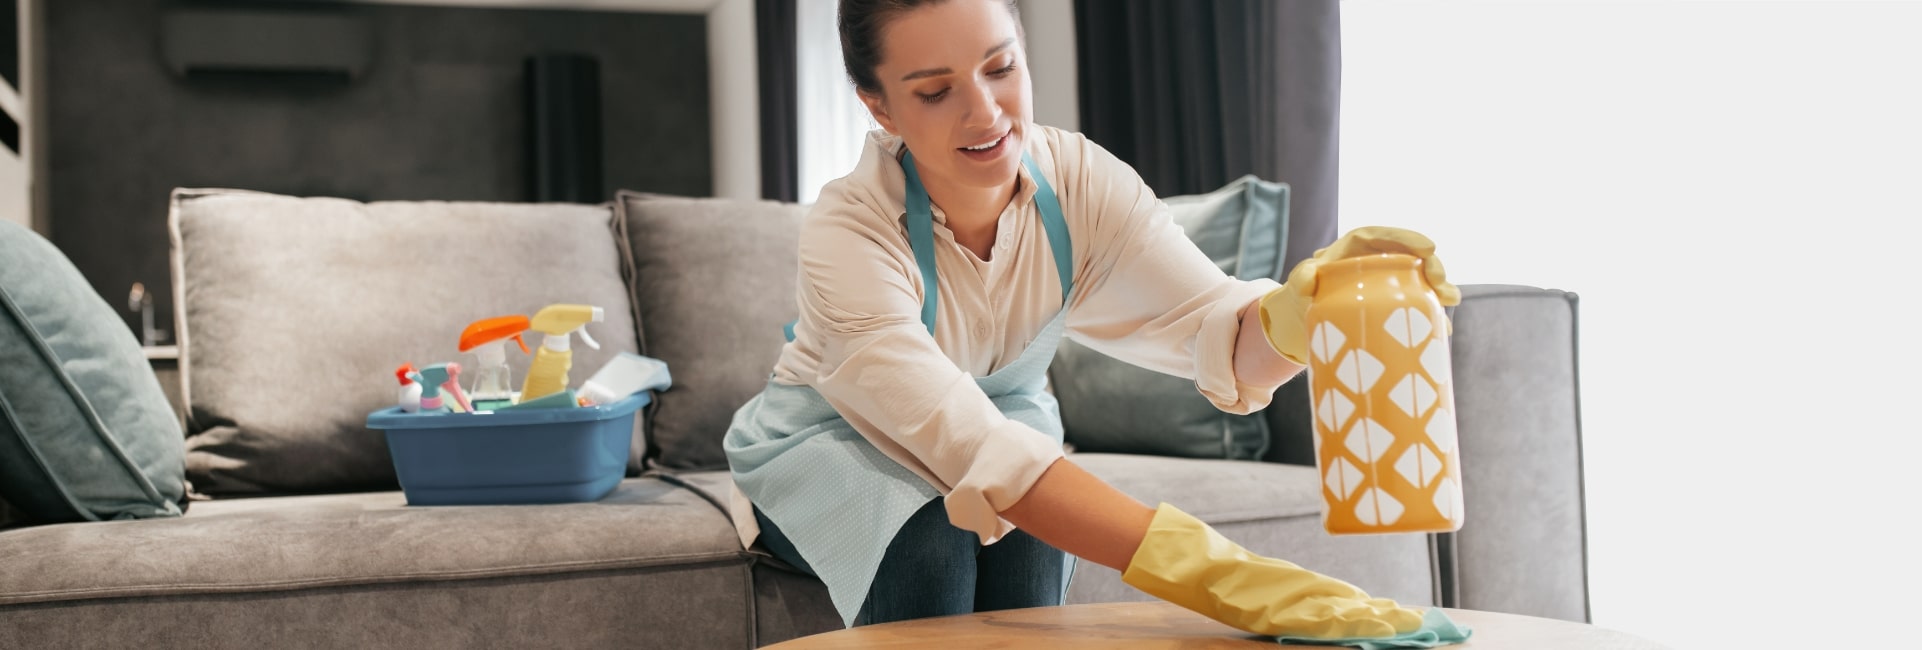 Residential home cleaning services